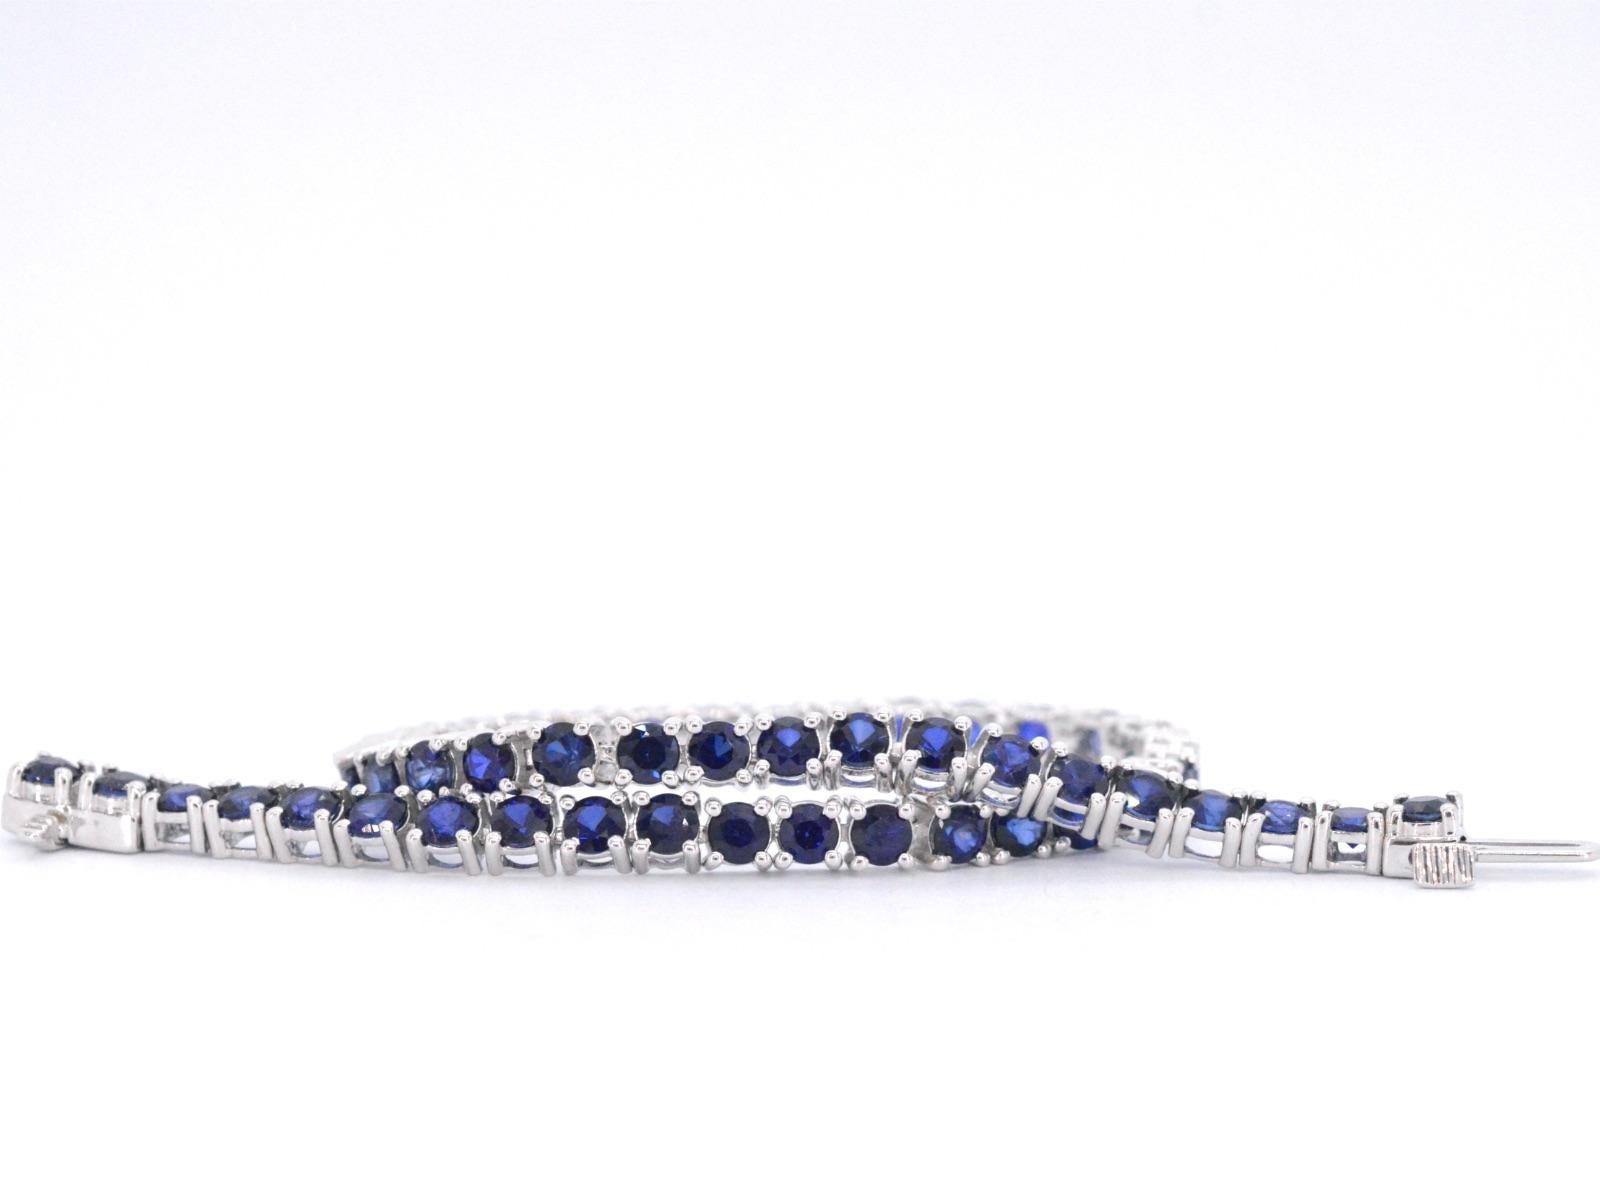 This white gold tennis bracelet is a true showstopper that is adorned with brilliant-cut sapphires. The sapphires are expertly set in a classic tennis style, creating a beautiful and timeless look. Each sapphire sparkles with unparalleled